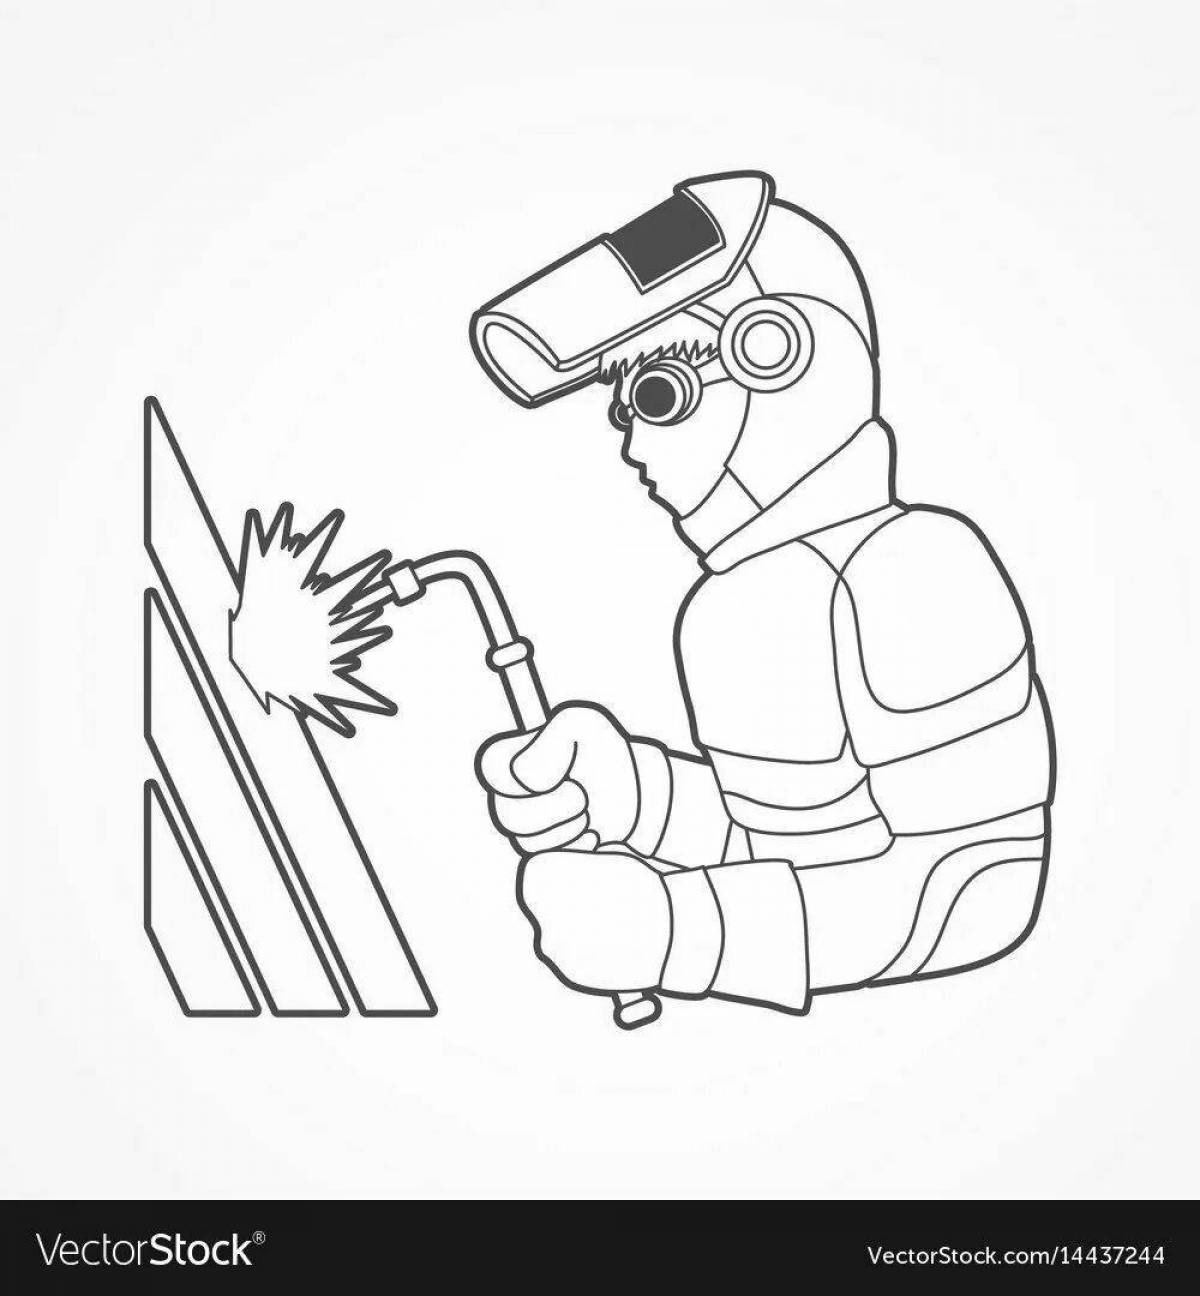 Colourful welder coloring book for kids